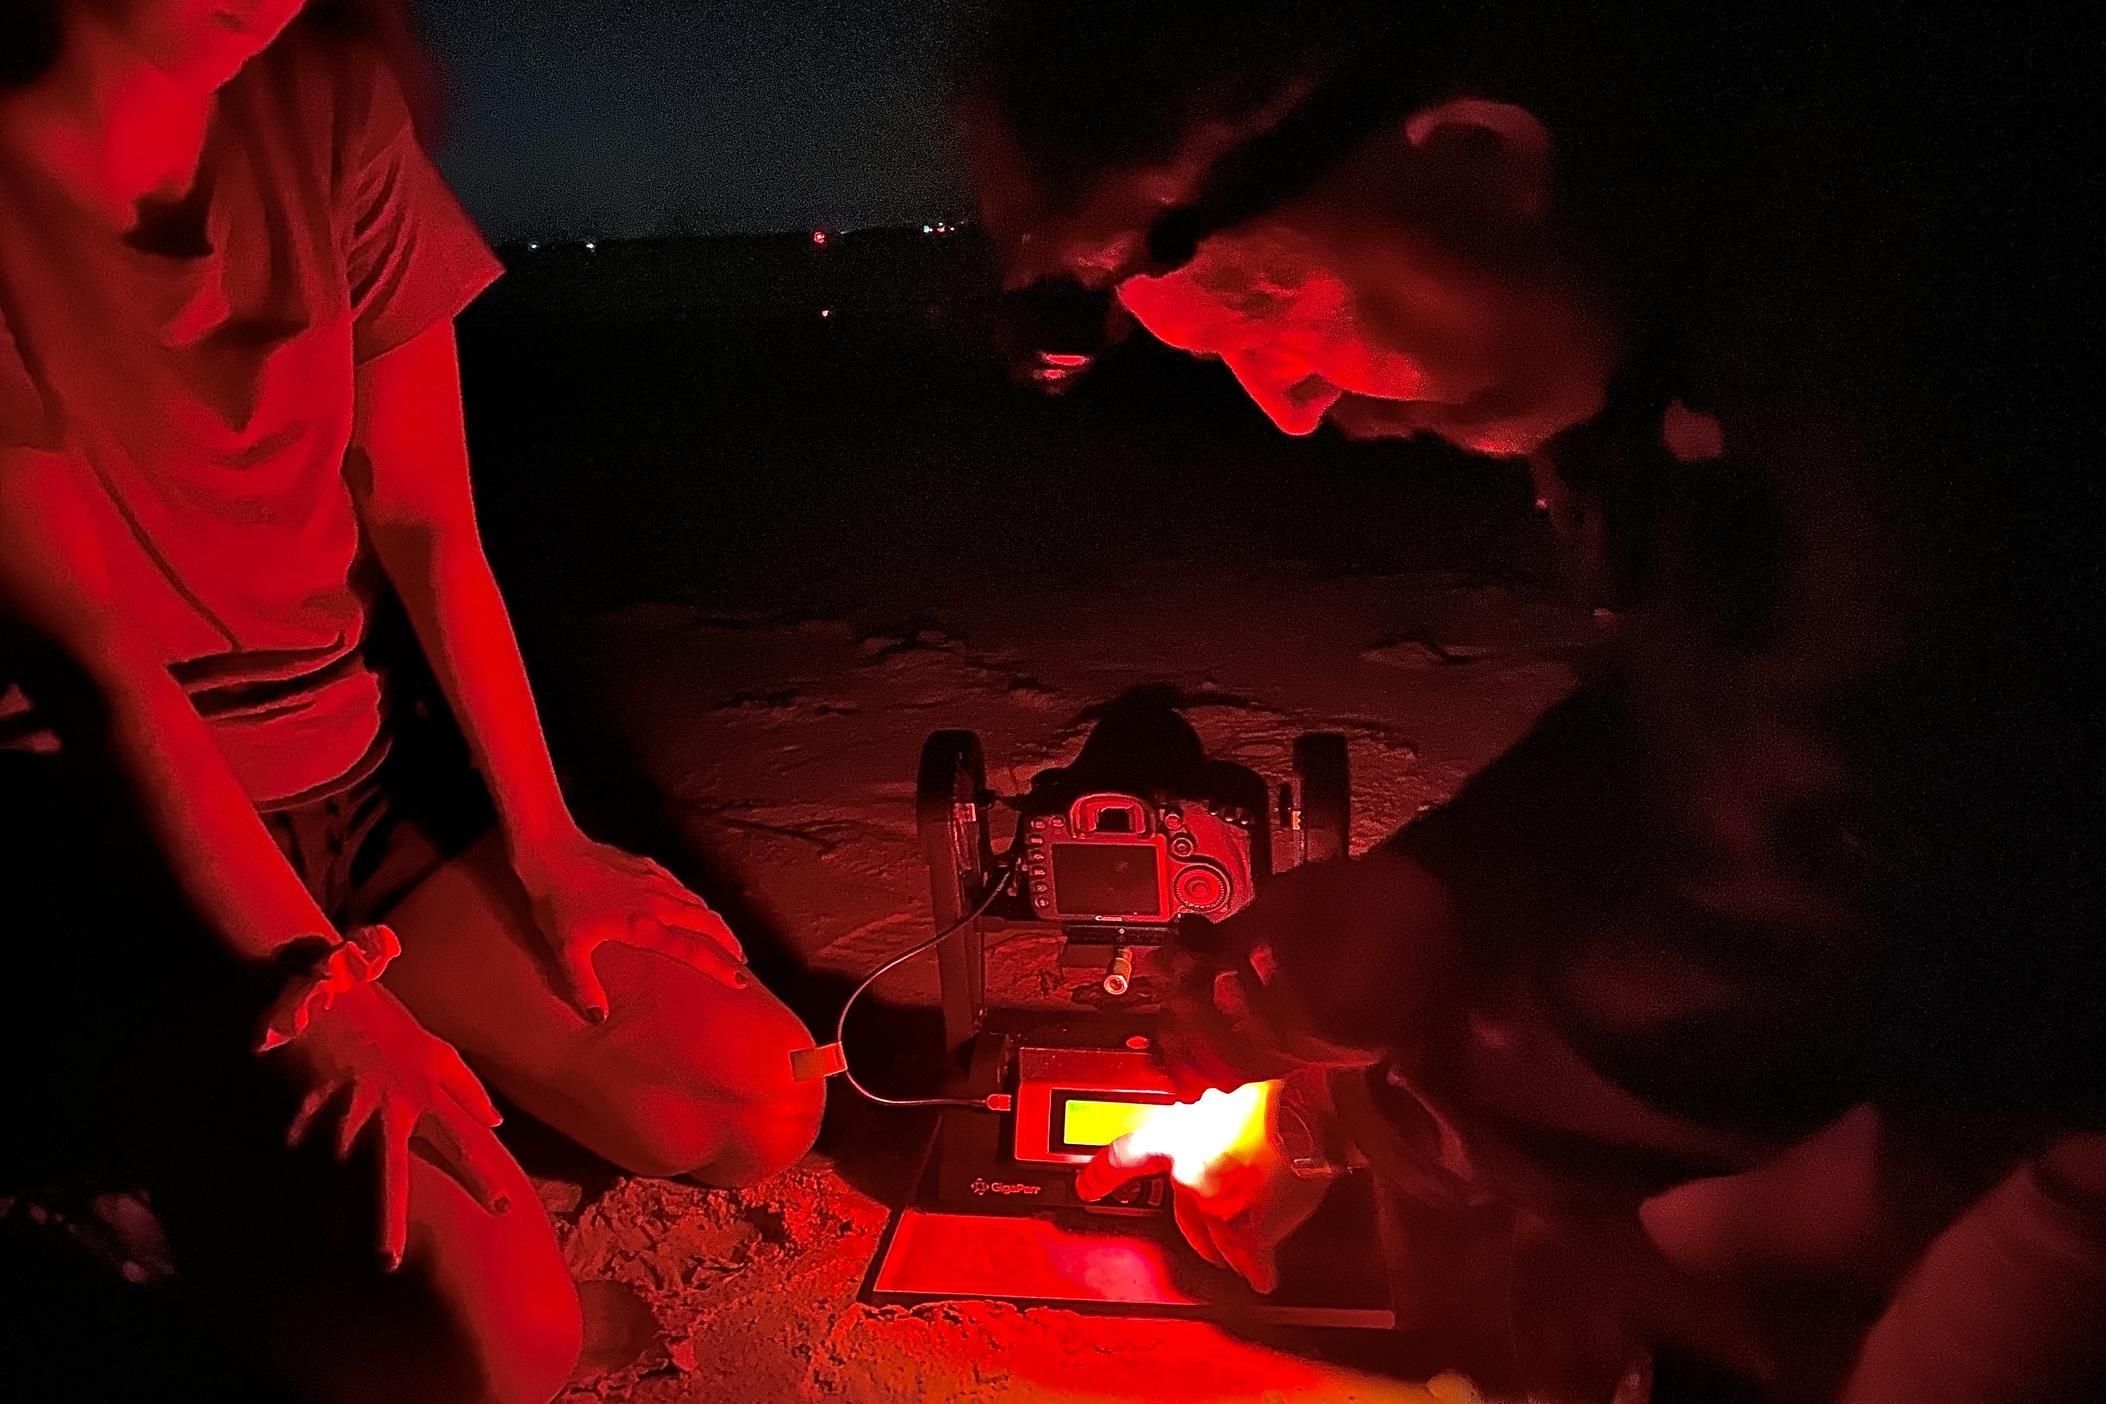 Savannah State University marine science professor Chris Hintz mounts a camera low to the ground on Jekyll Island's Driftwood Beach, while graduate student Emma Patterson watches. They use red-light flashlights to navigate, as sea turtles cannot see that color as well as others.